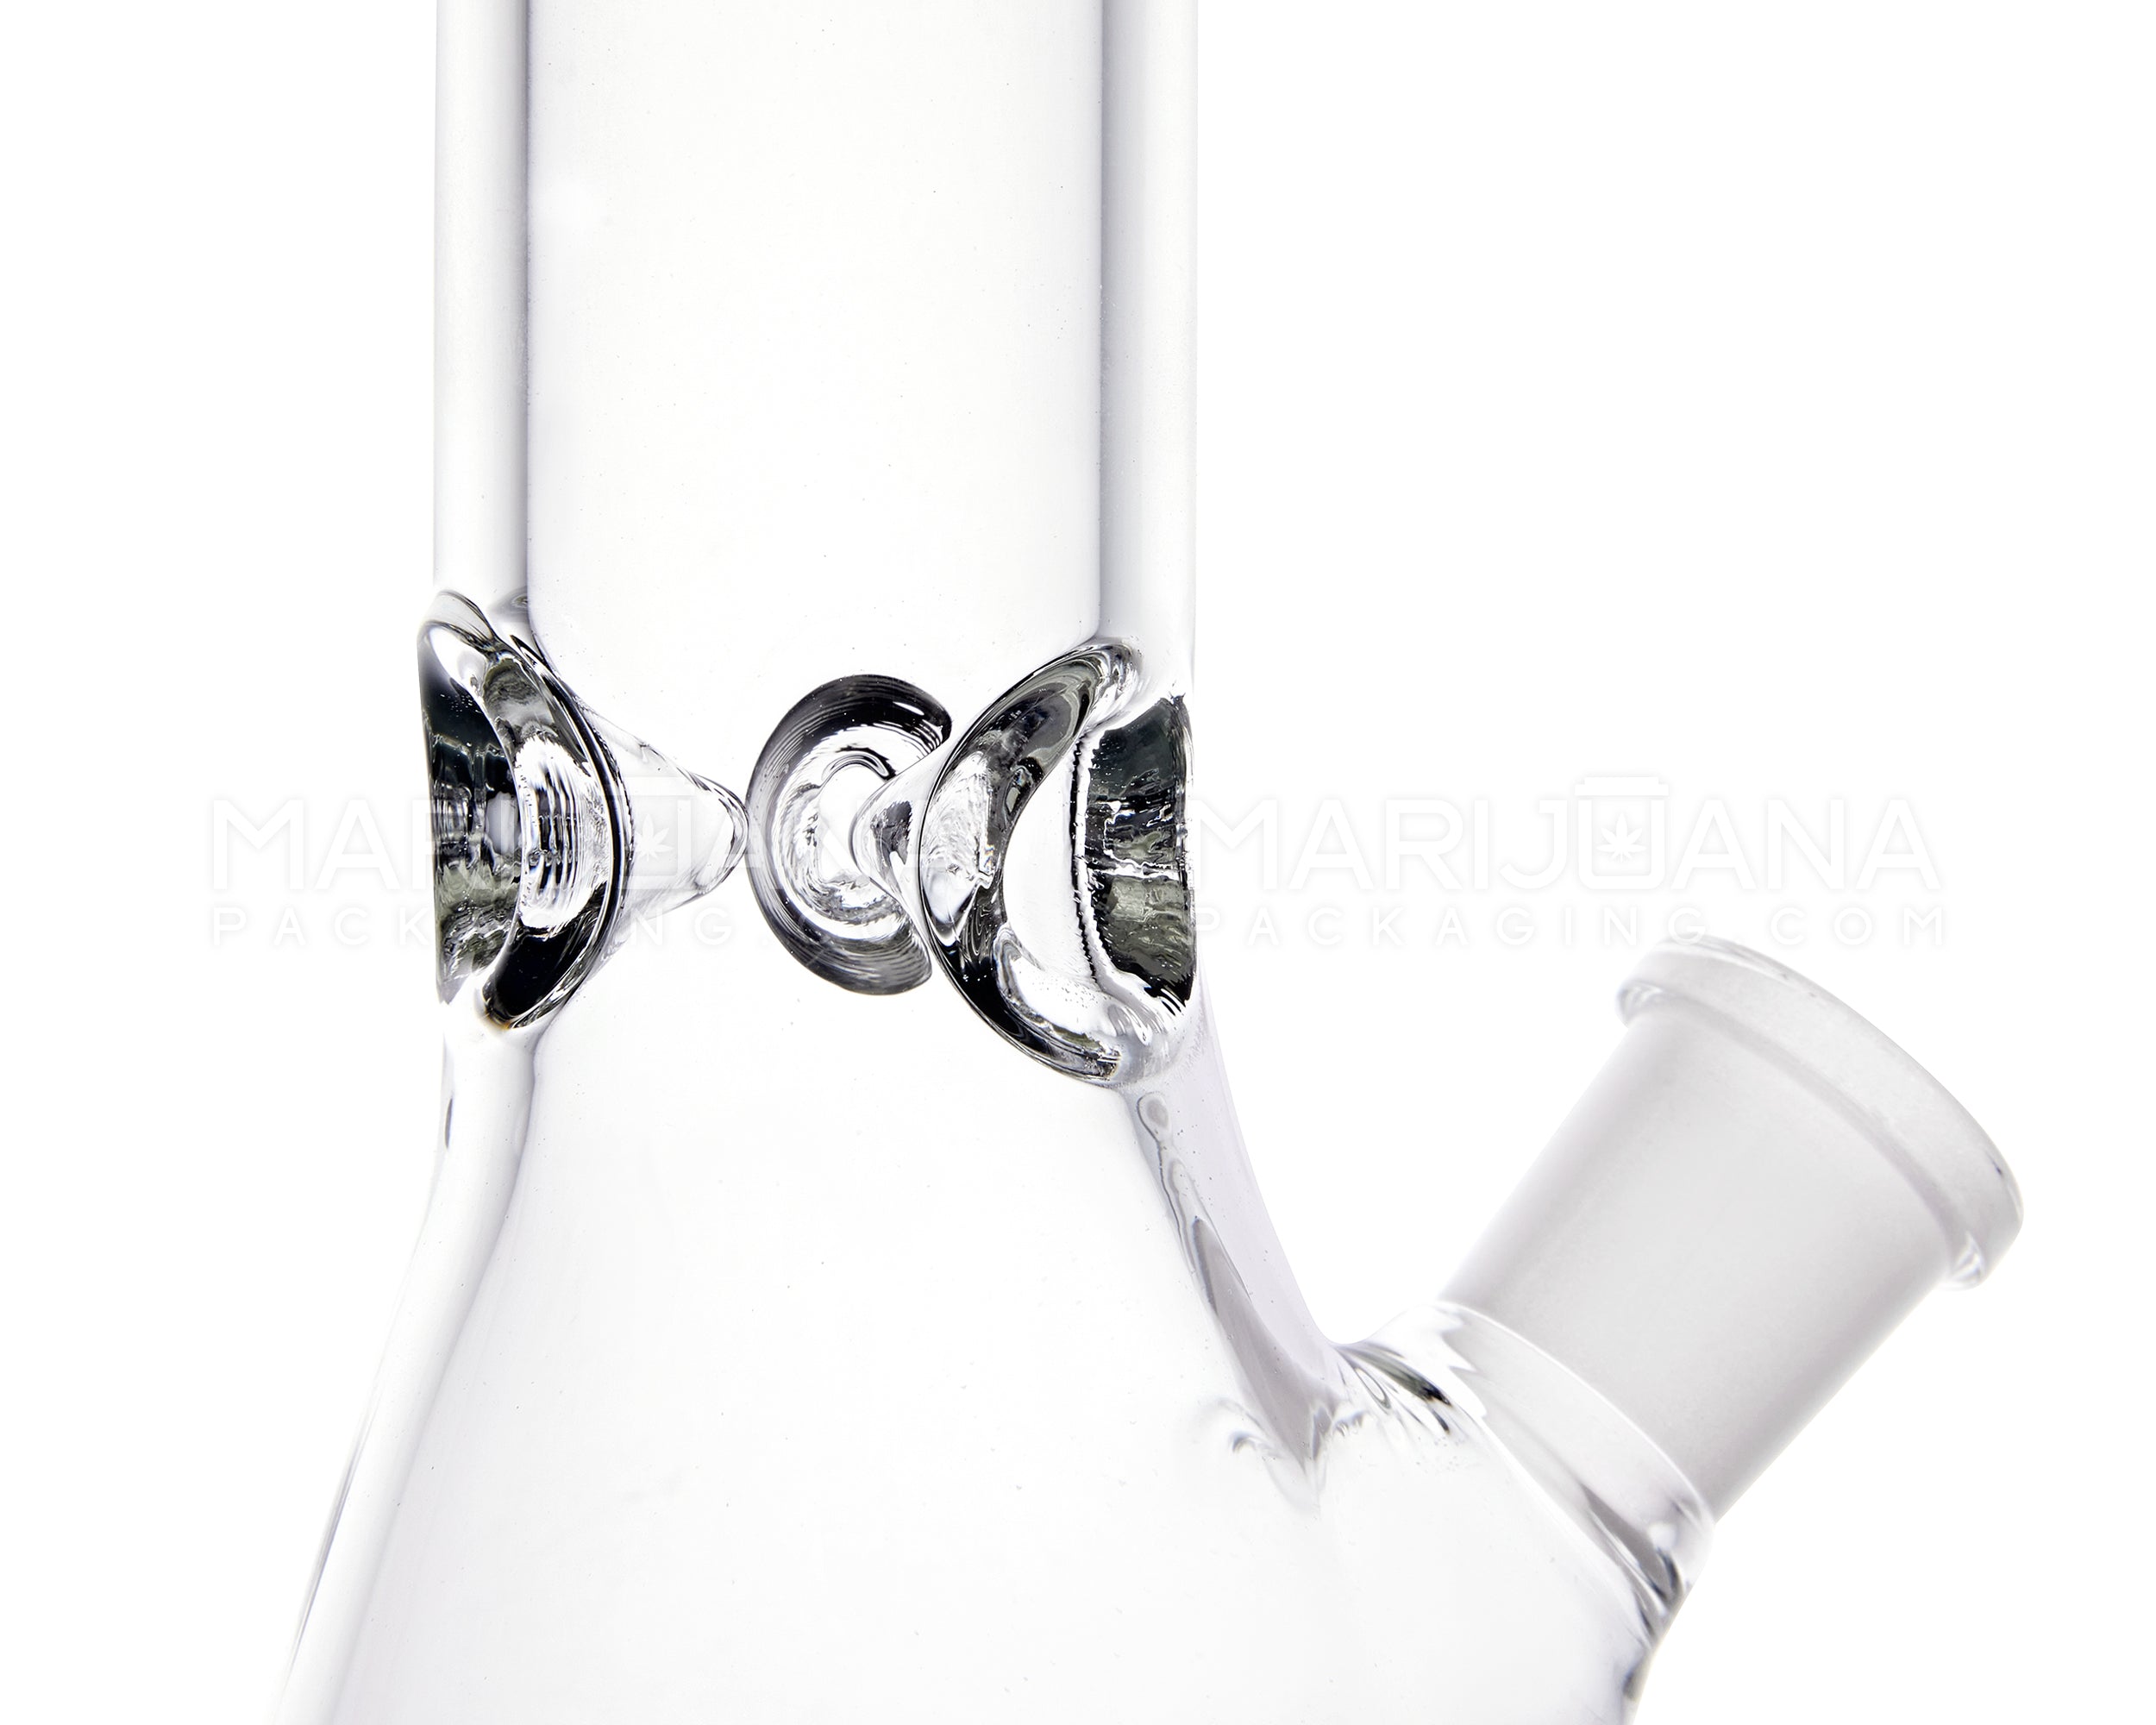 Straight Neck Color Lip Glass Beaker Water Pipe w/ Ice Catcher | 10.25in Tall - 14mm Bowl - Green